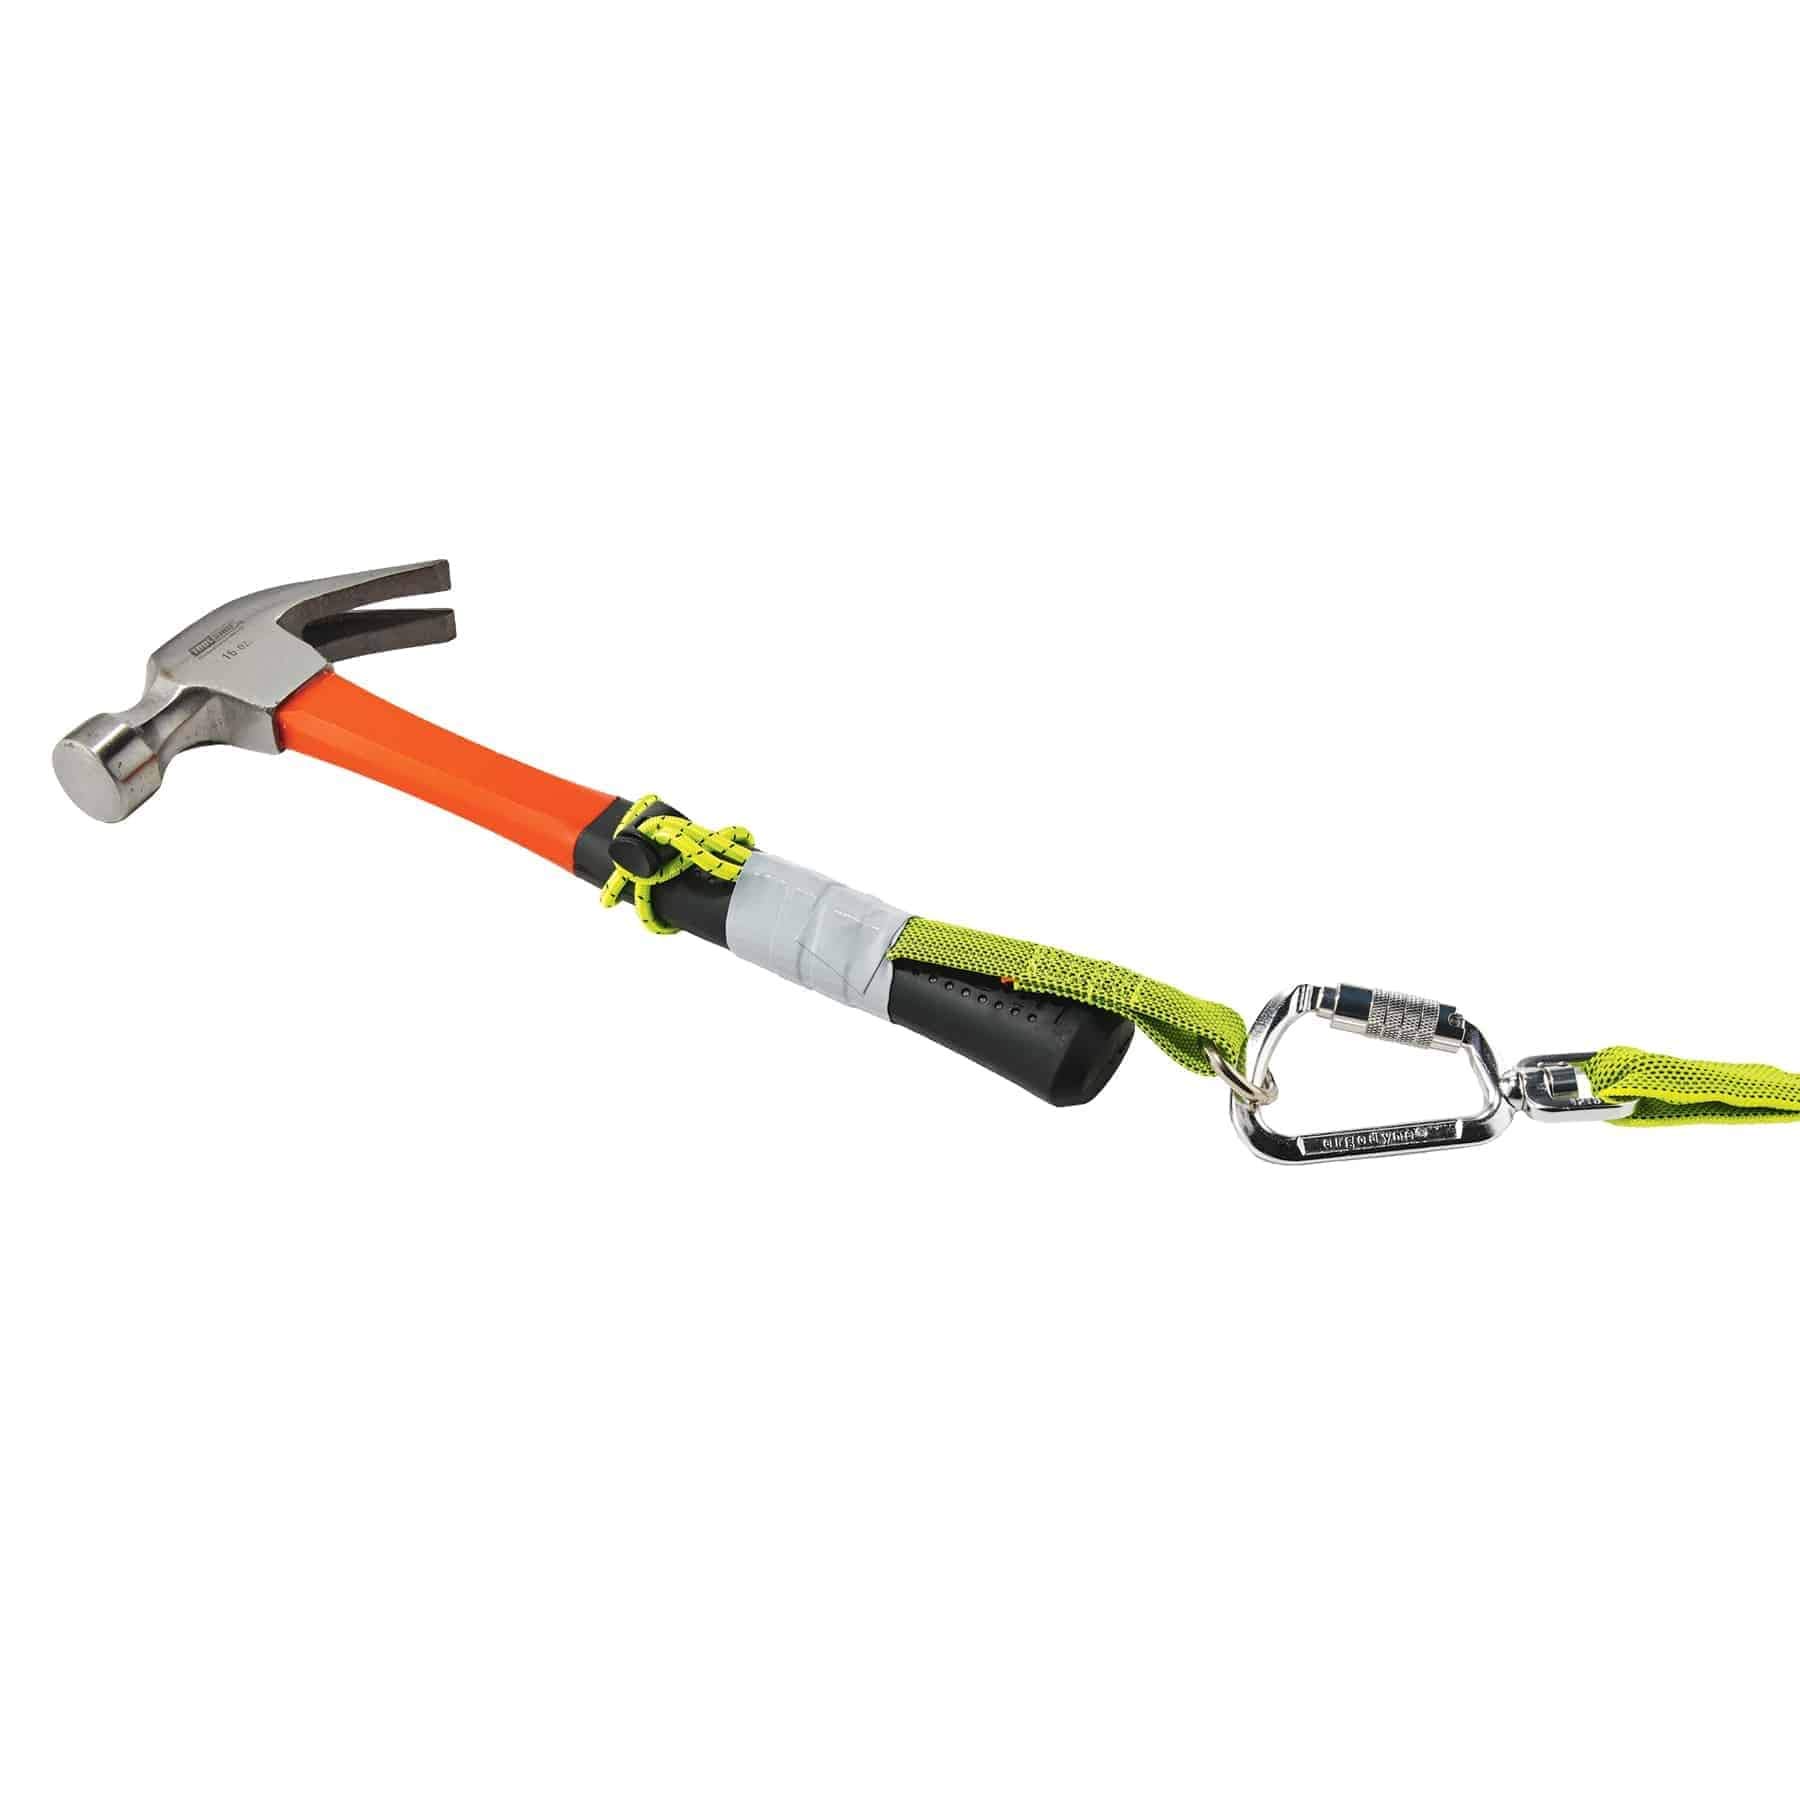 Ergodyne Squids 3703 Tool Tail Attachment with Loop End, Standard Length, 15 Pounds,Lime